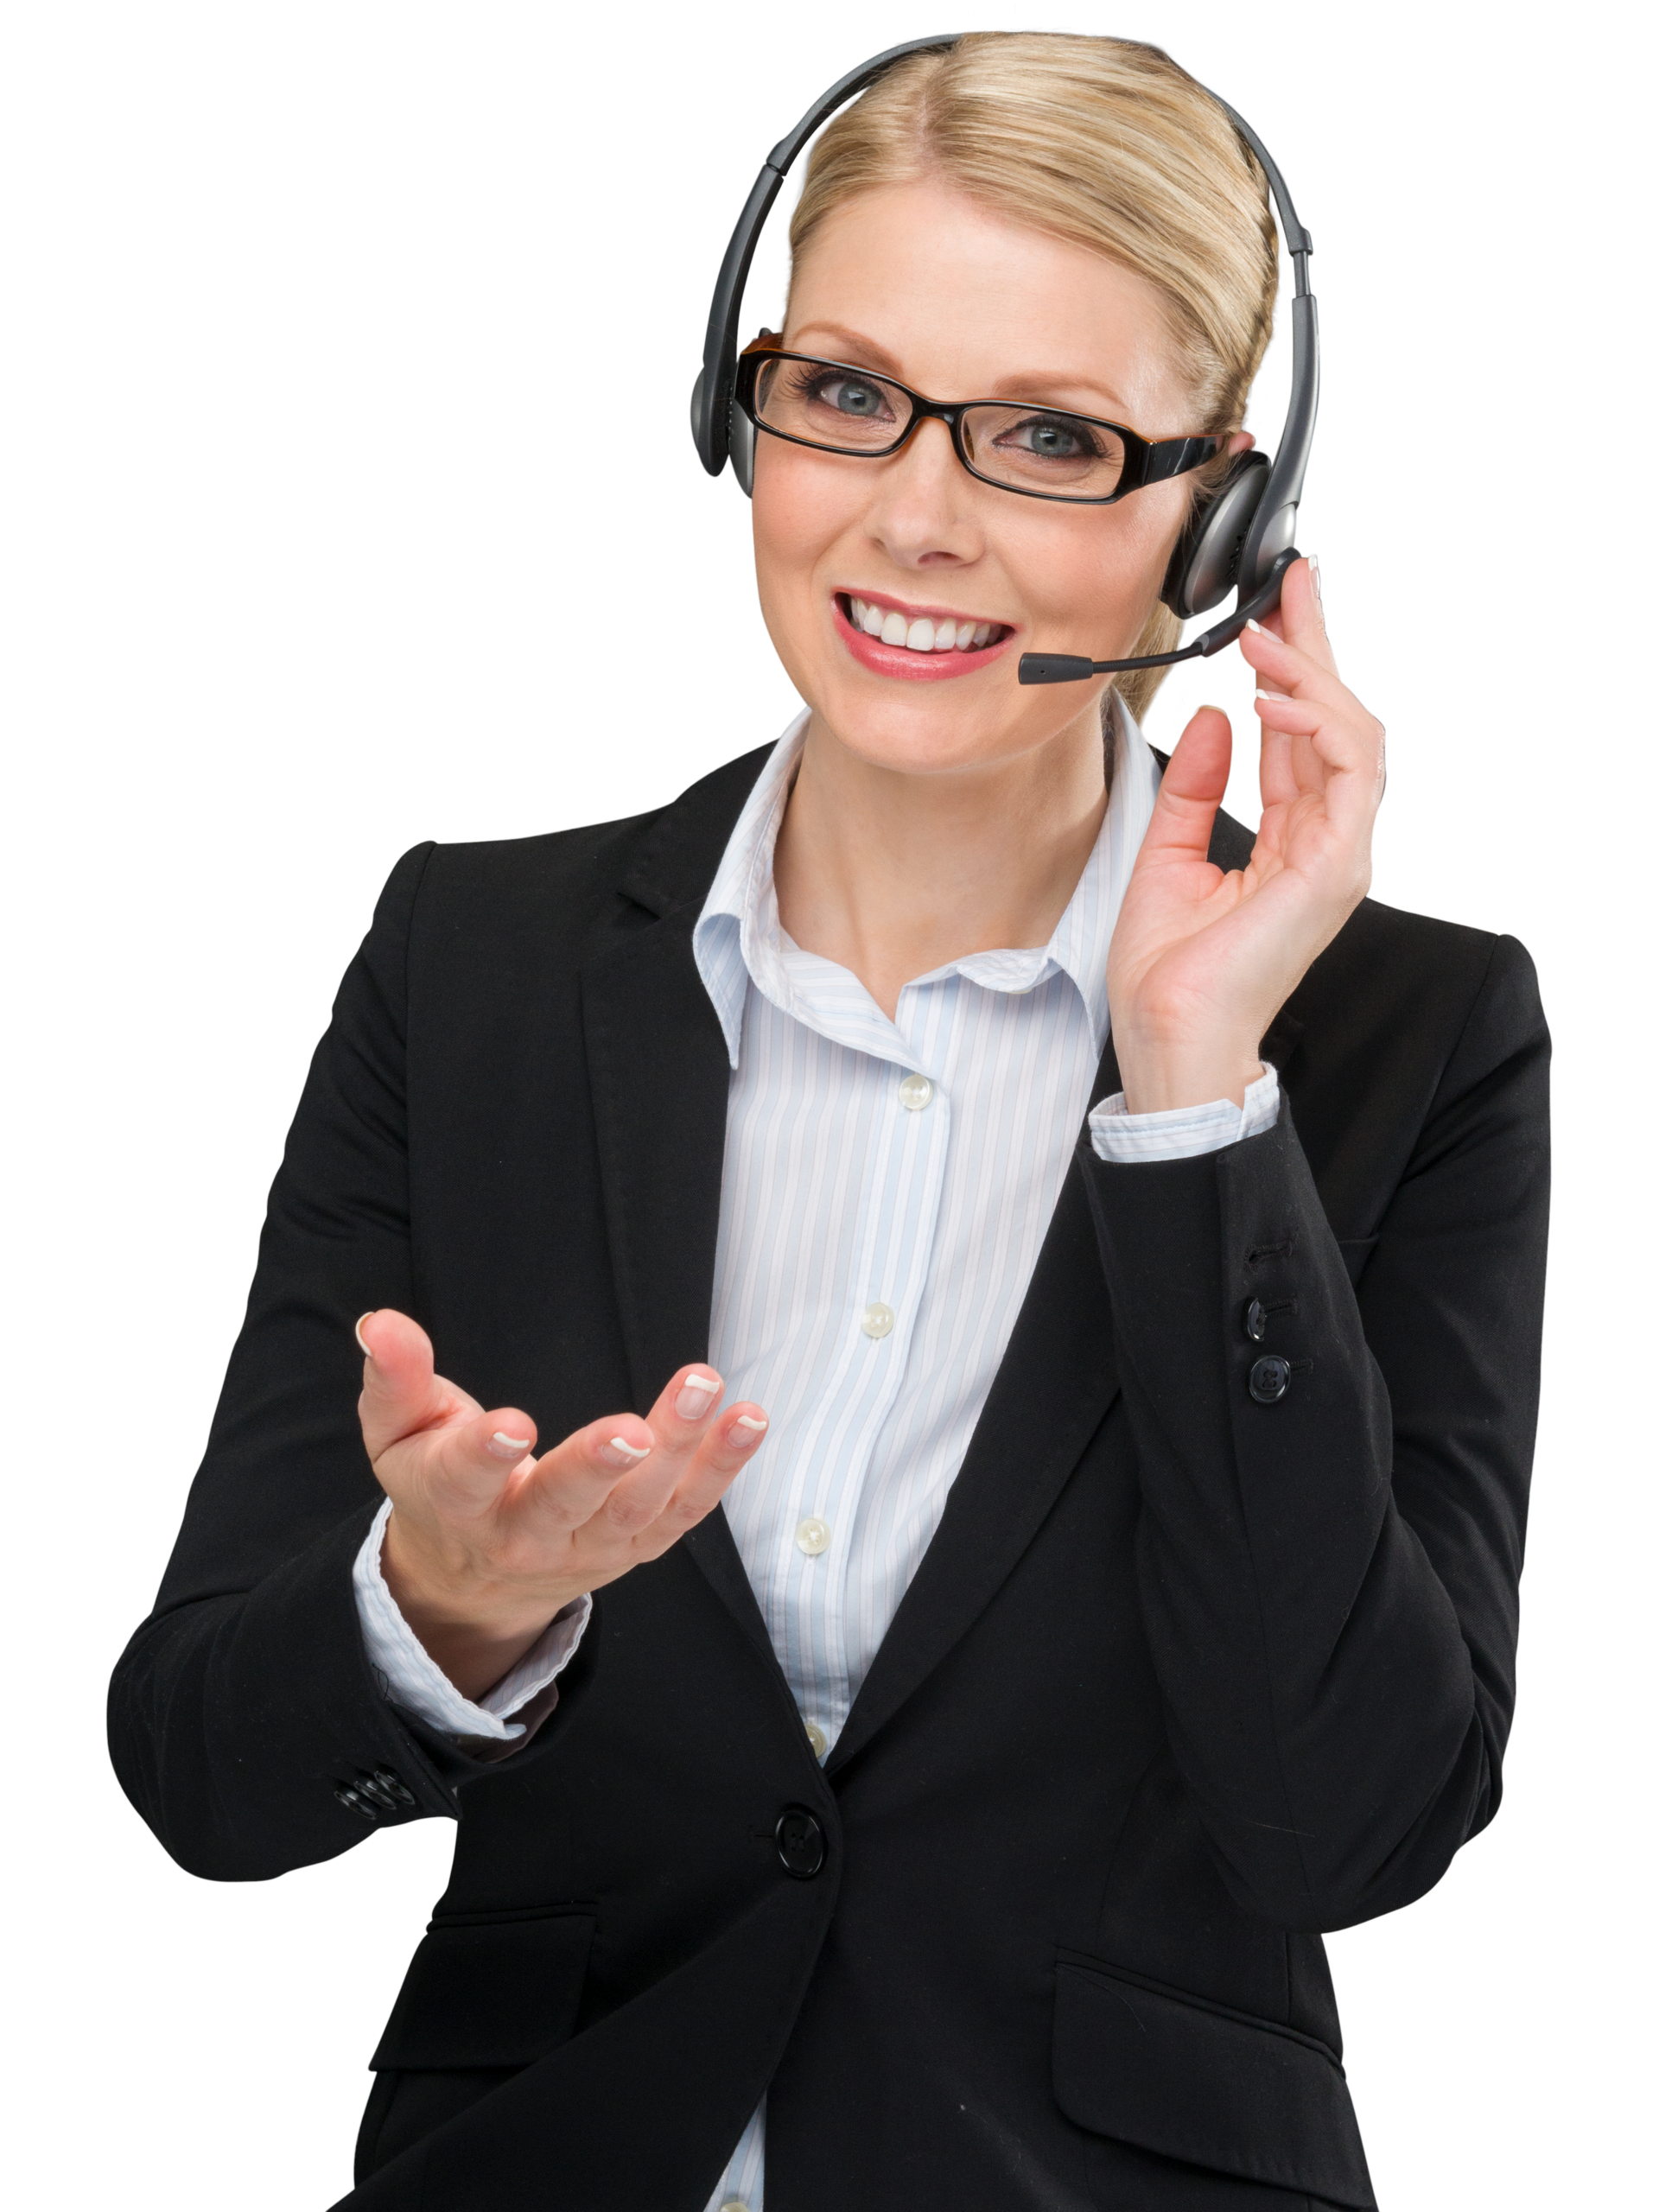 A virtual assistant wearing a headset is smiling and holding out her hand